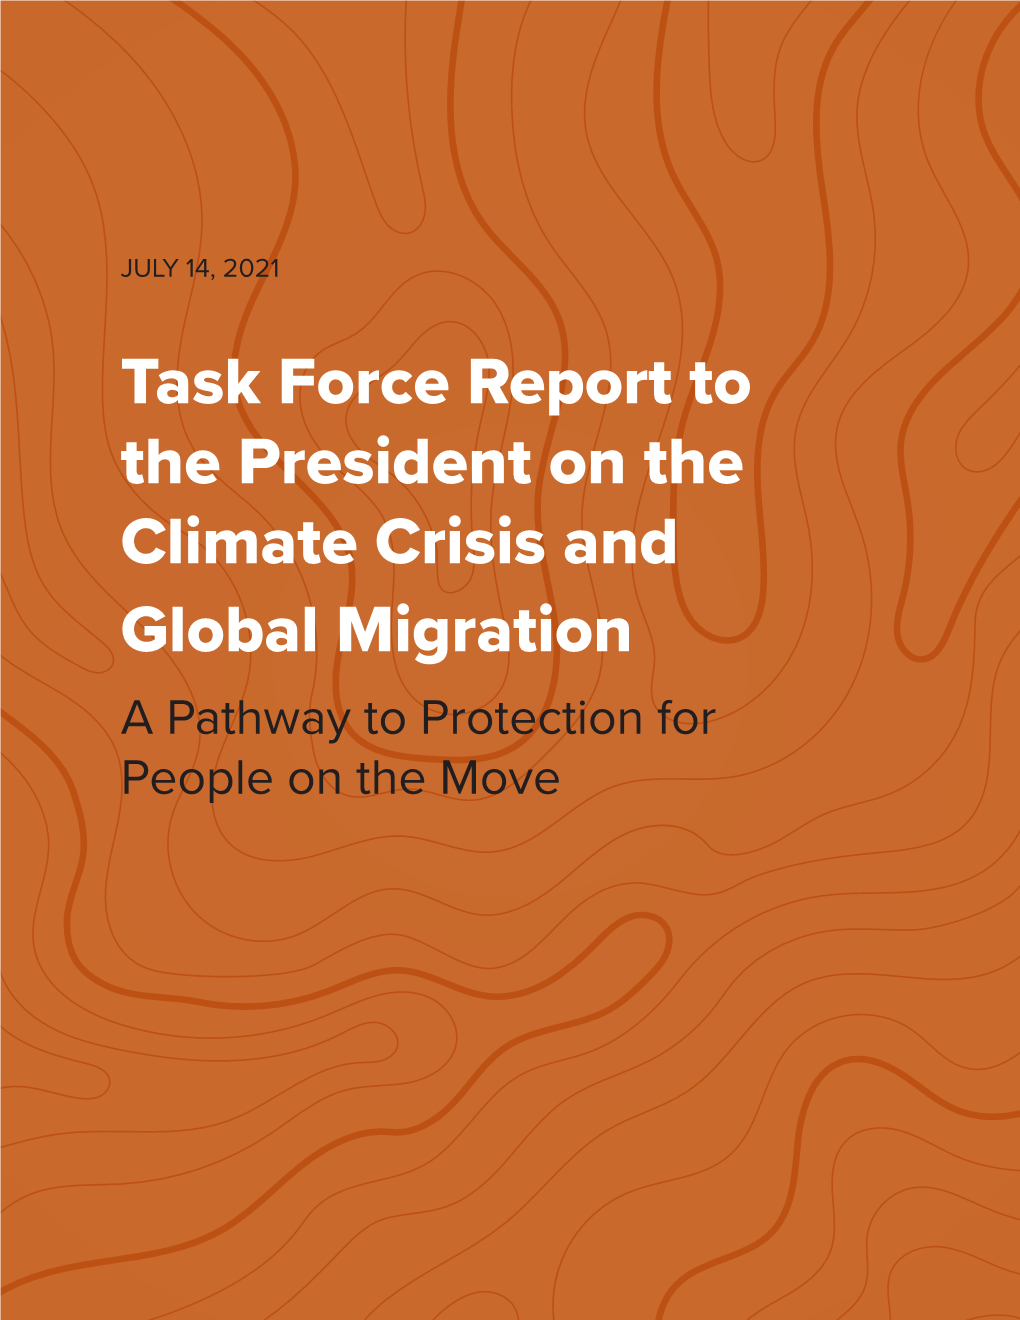 Task Force Report to the President on the Climate Crisis and Global Migration